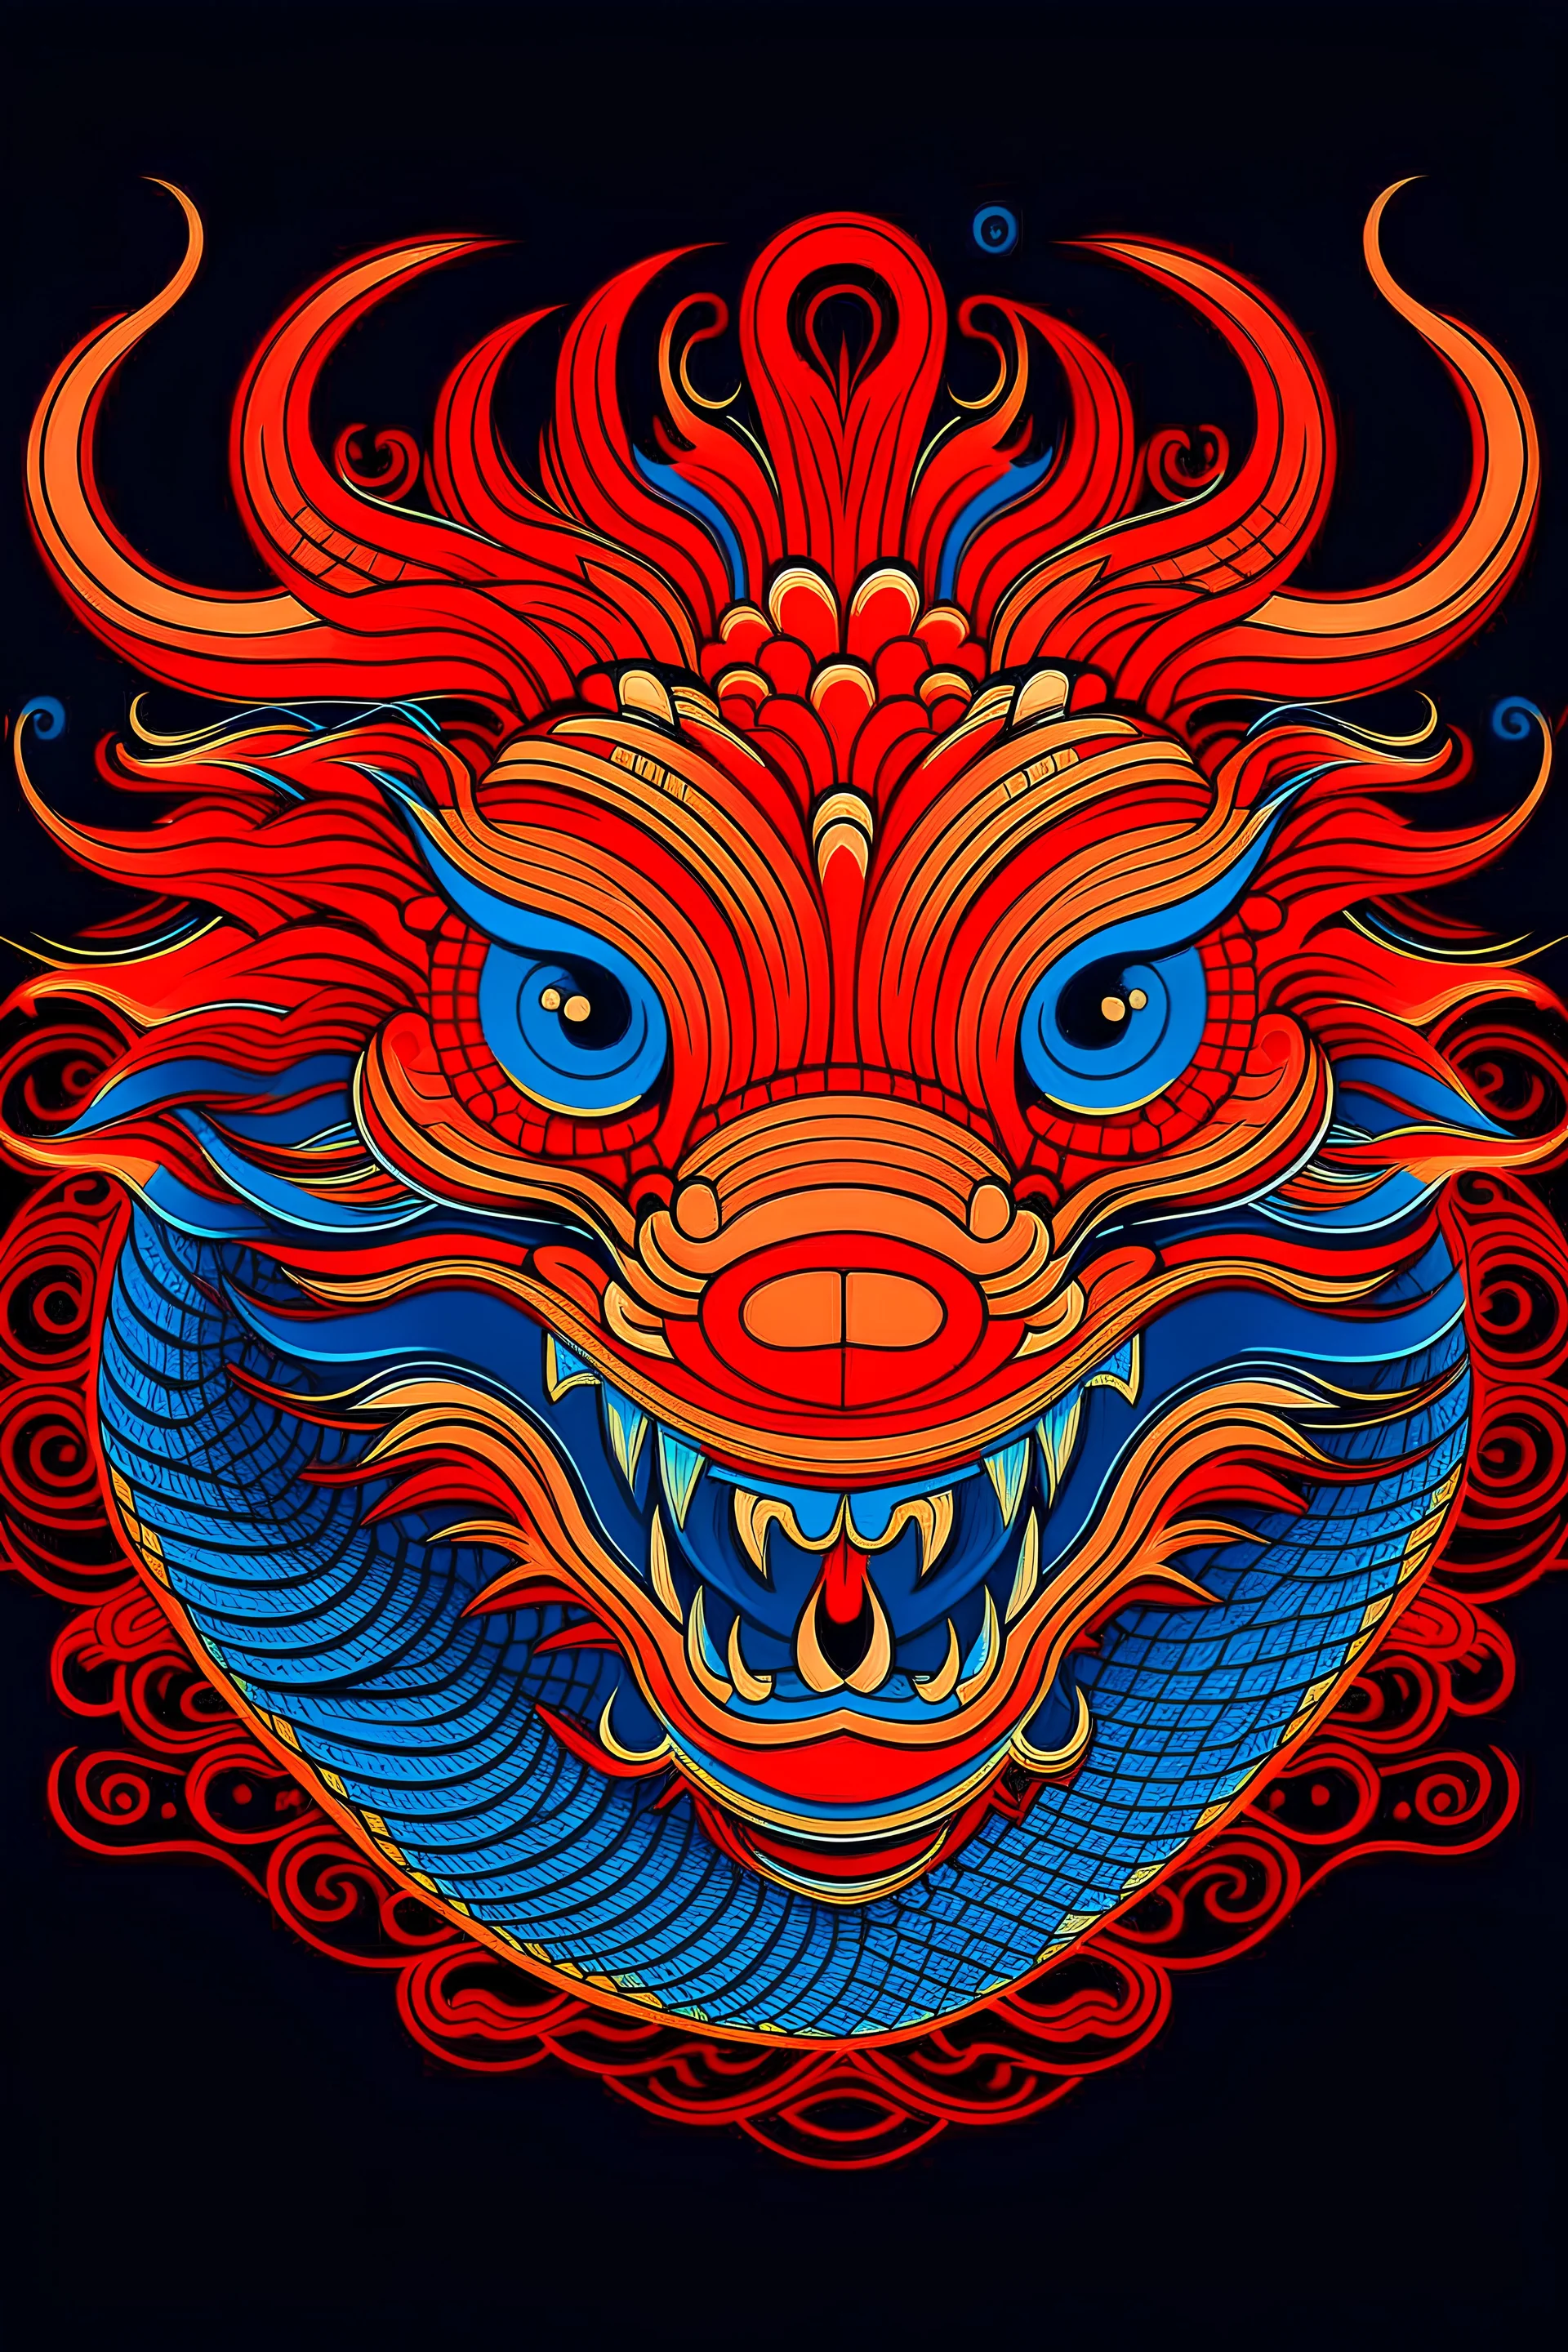 The elements of radio waves are used to form a simple line pattern of a Chinese dragon head in the Pop style. The overall image is a front view and the colours are mainly red, blue and orange.